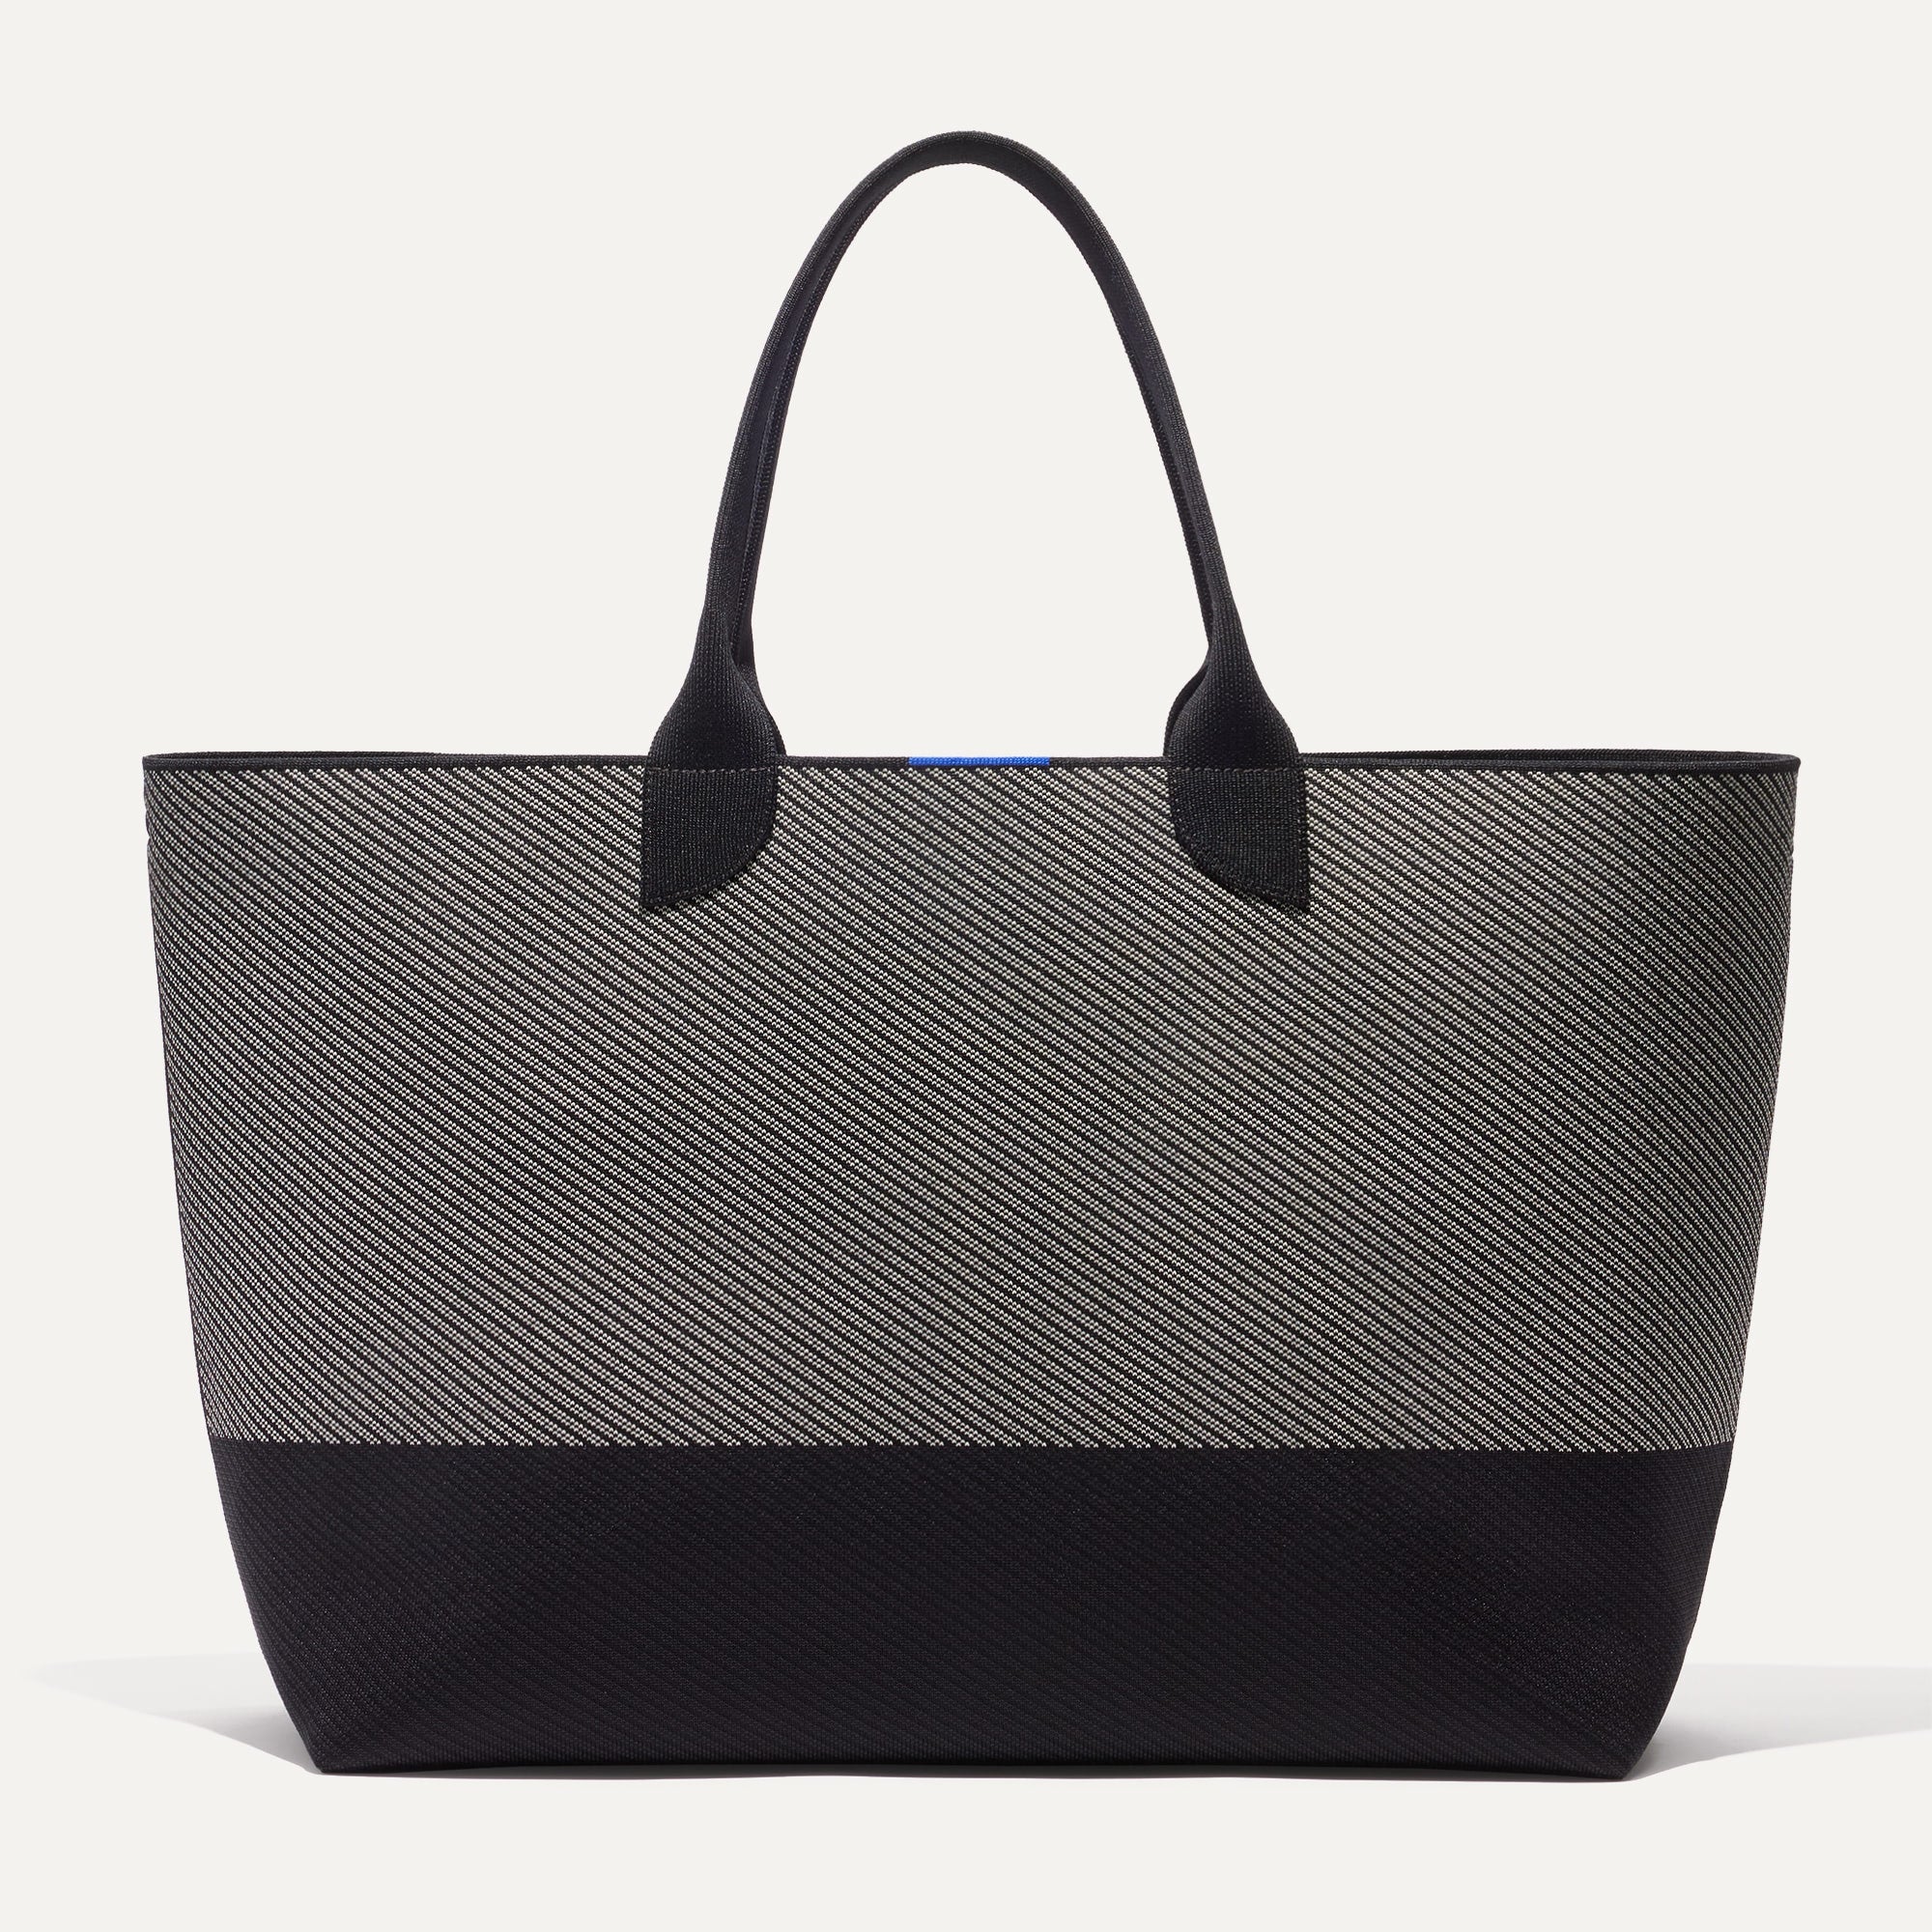 The Lightweight Mega Tote in Courtside White